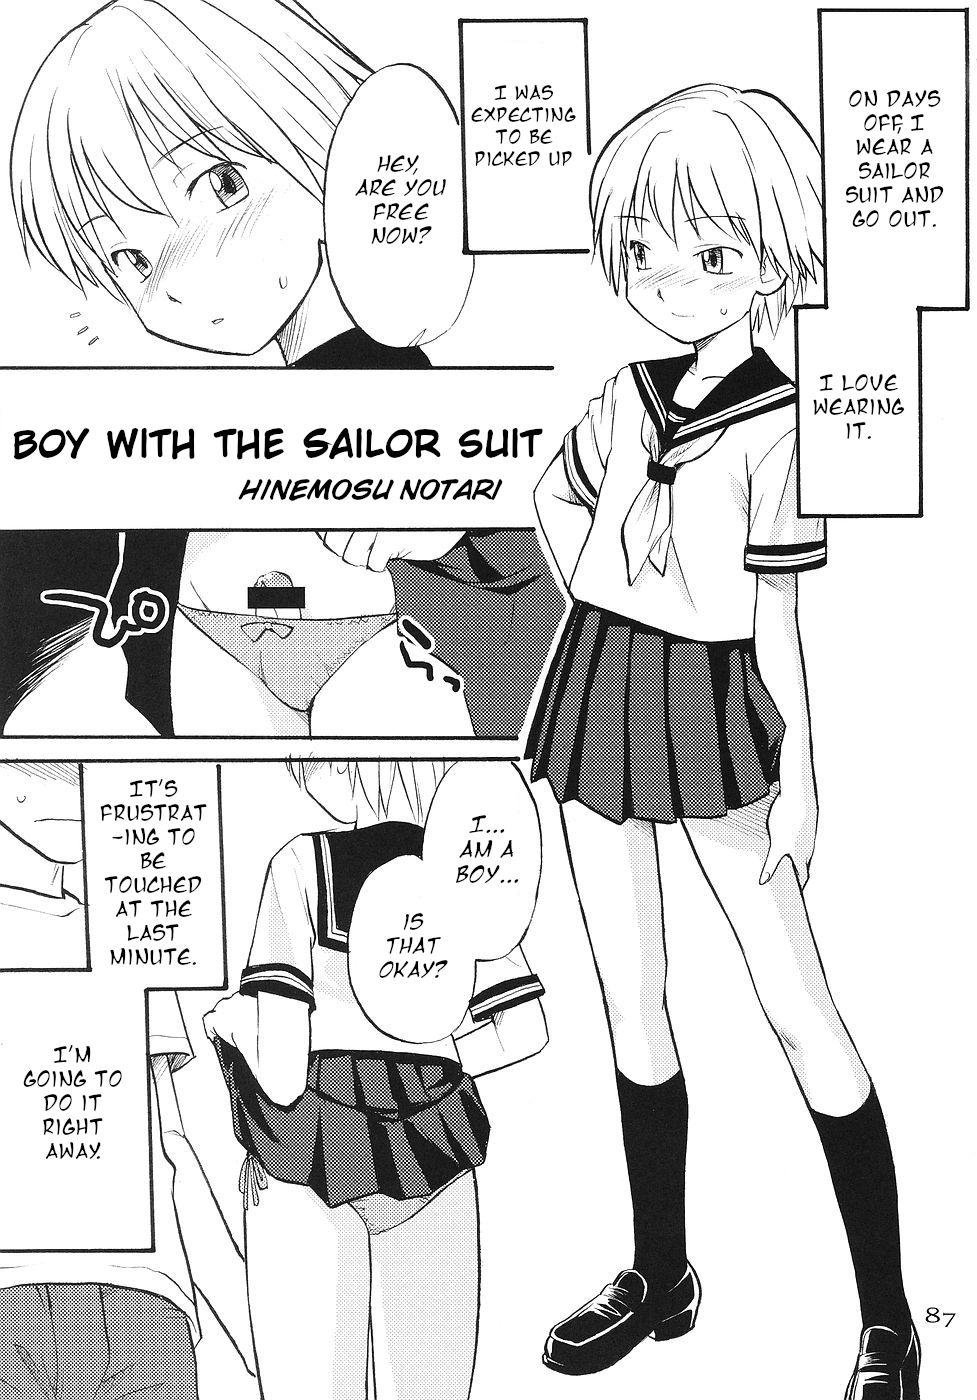 Camera Boy with the Sailor Suit Free Blow Job - Page 1